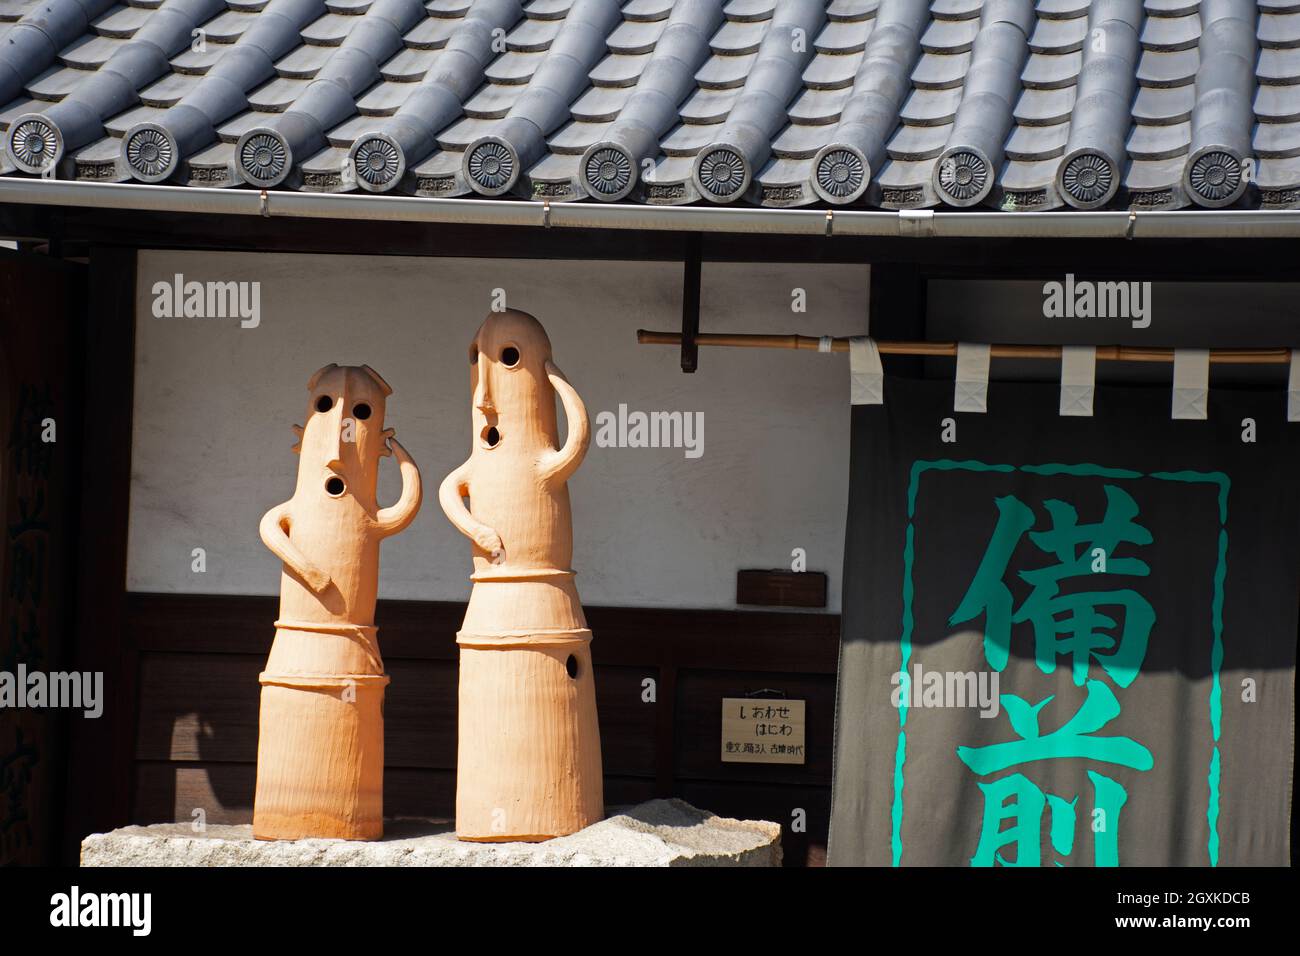 Wooden sculptures in a Japanese Temple, Okayama, Japan Stock Photo